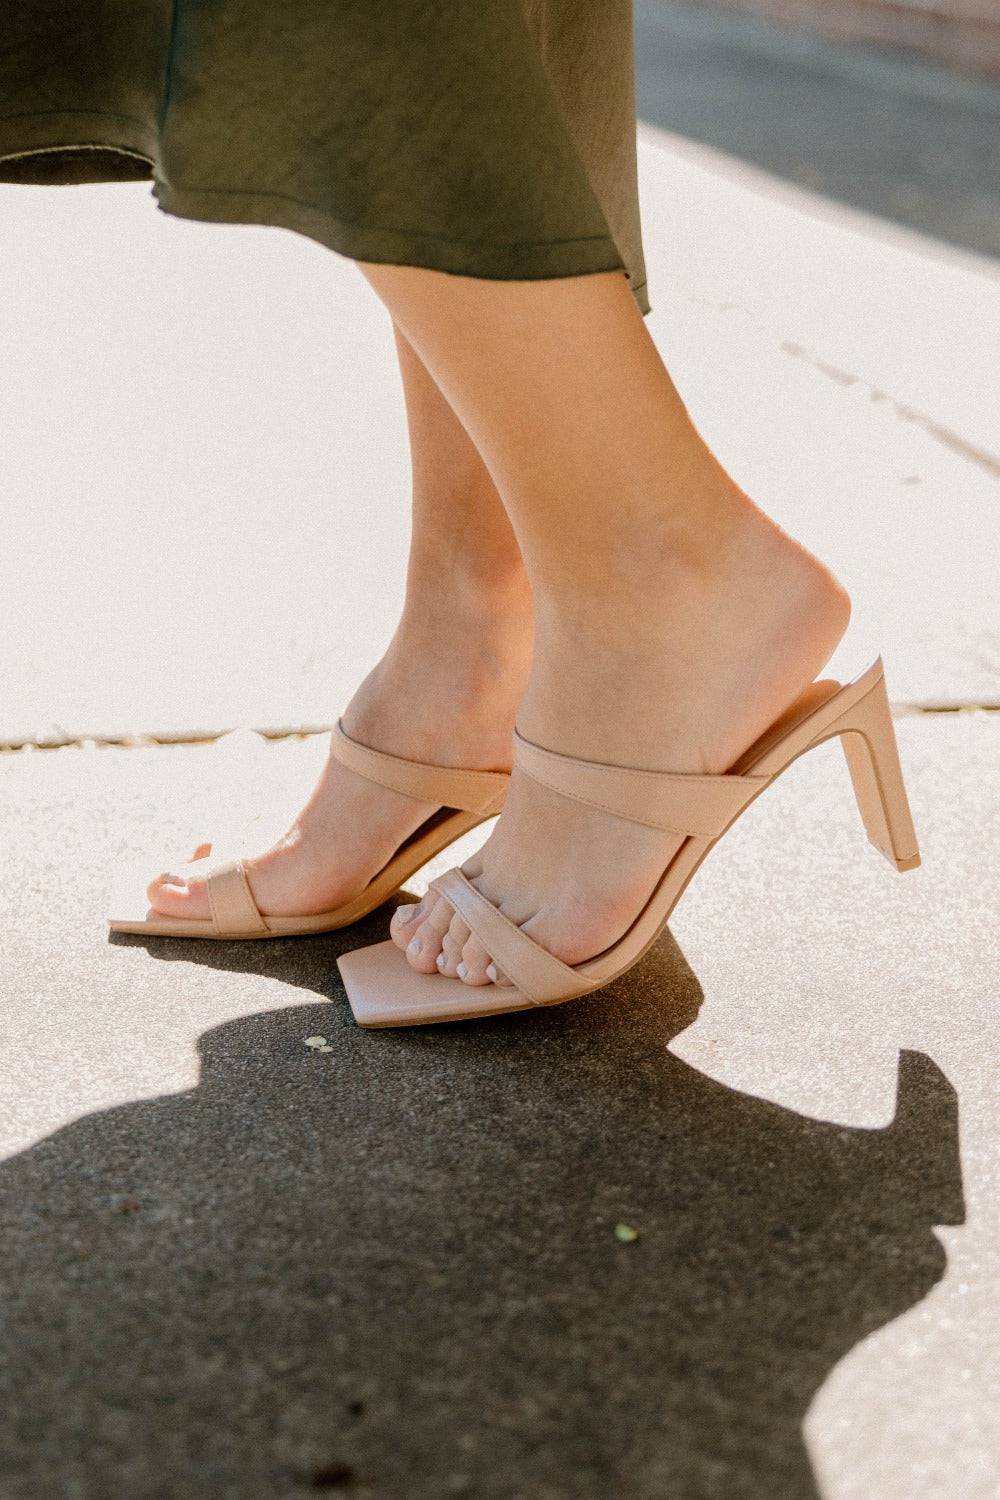 YAYA Dress Sandal Heel in Nude by Chinese Laundry